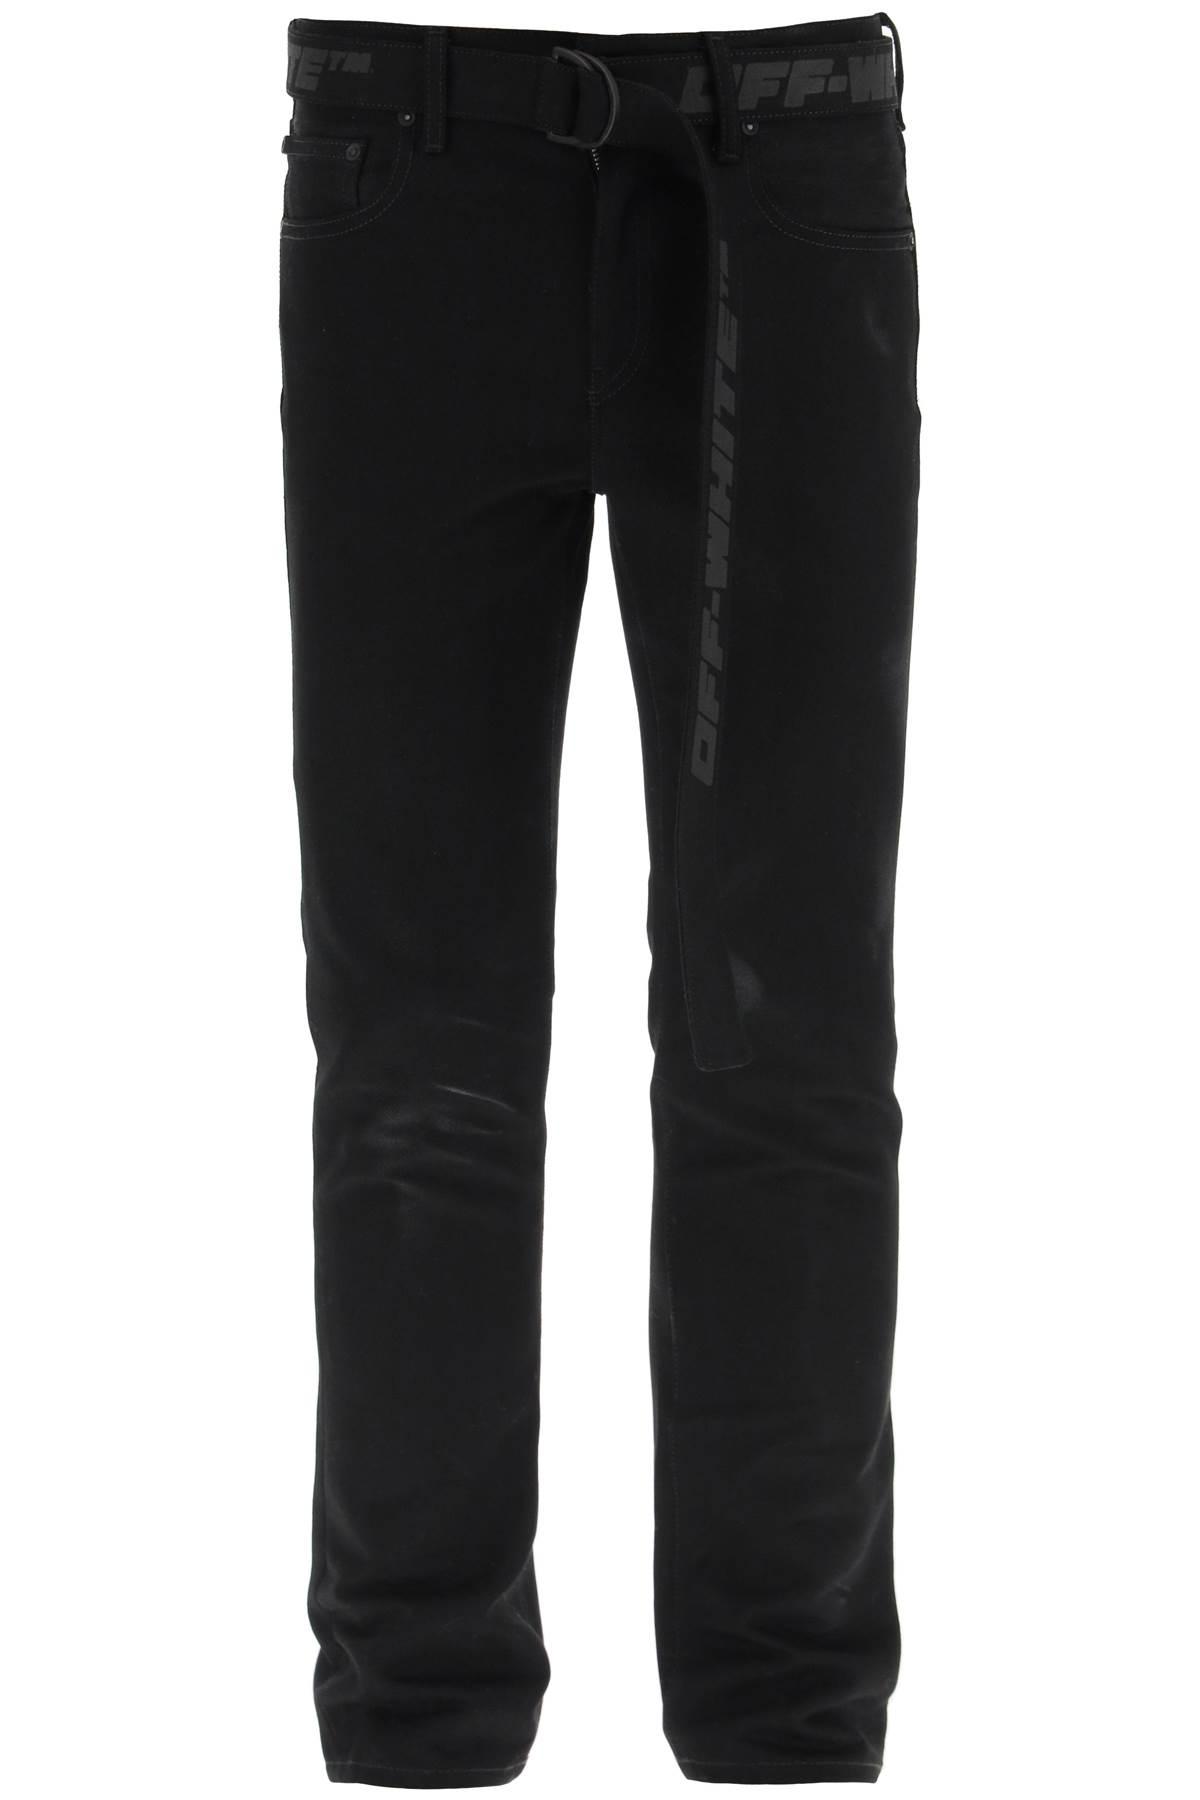 OFF-WHITE JEANS WITH LOGOED BELT